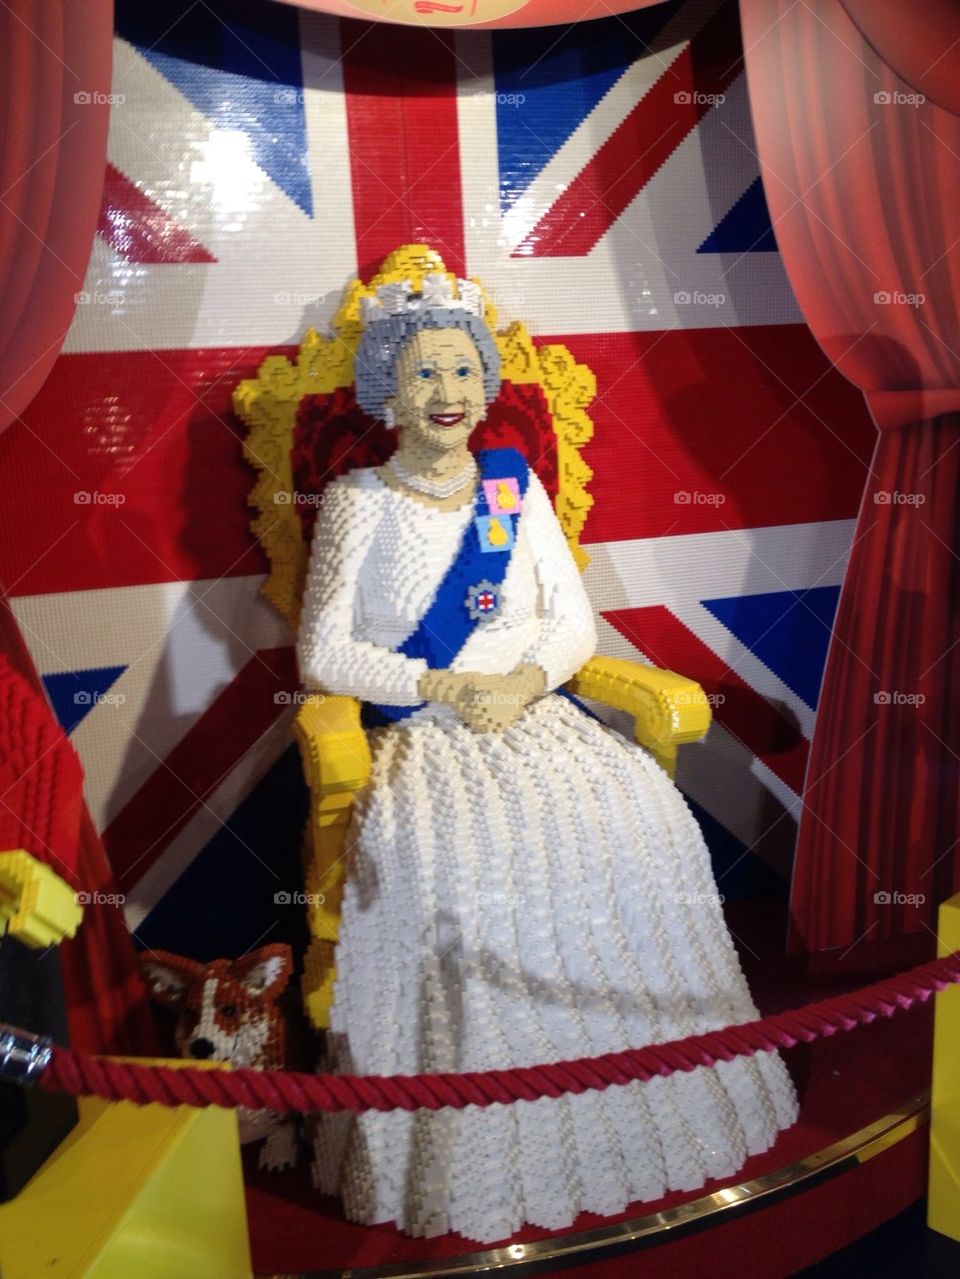 The Queen of England in lego